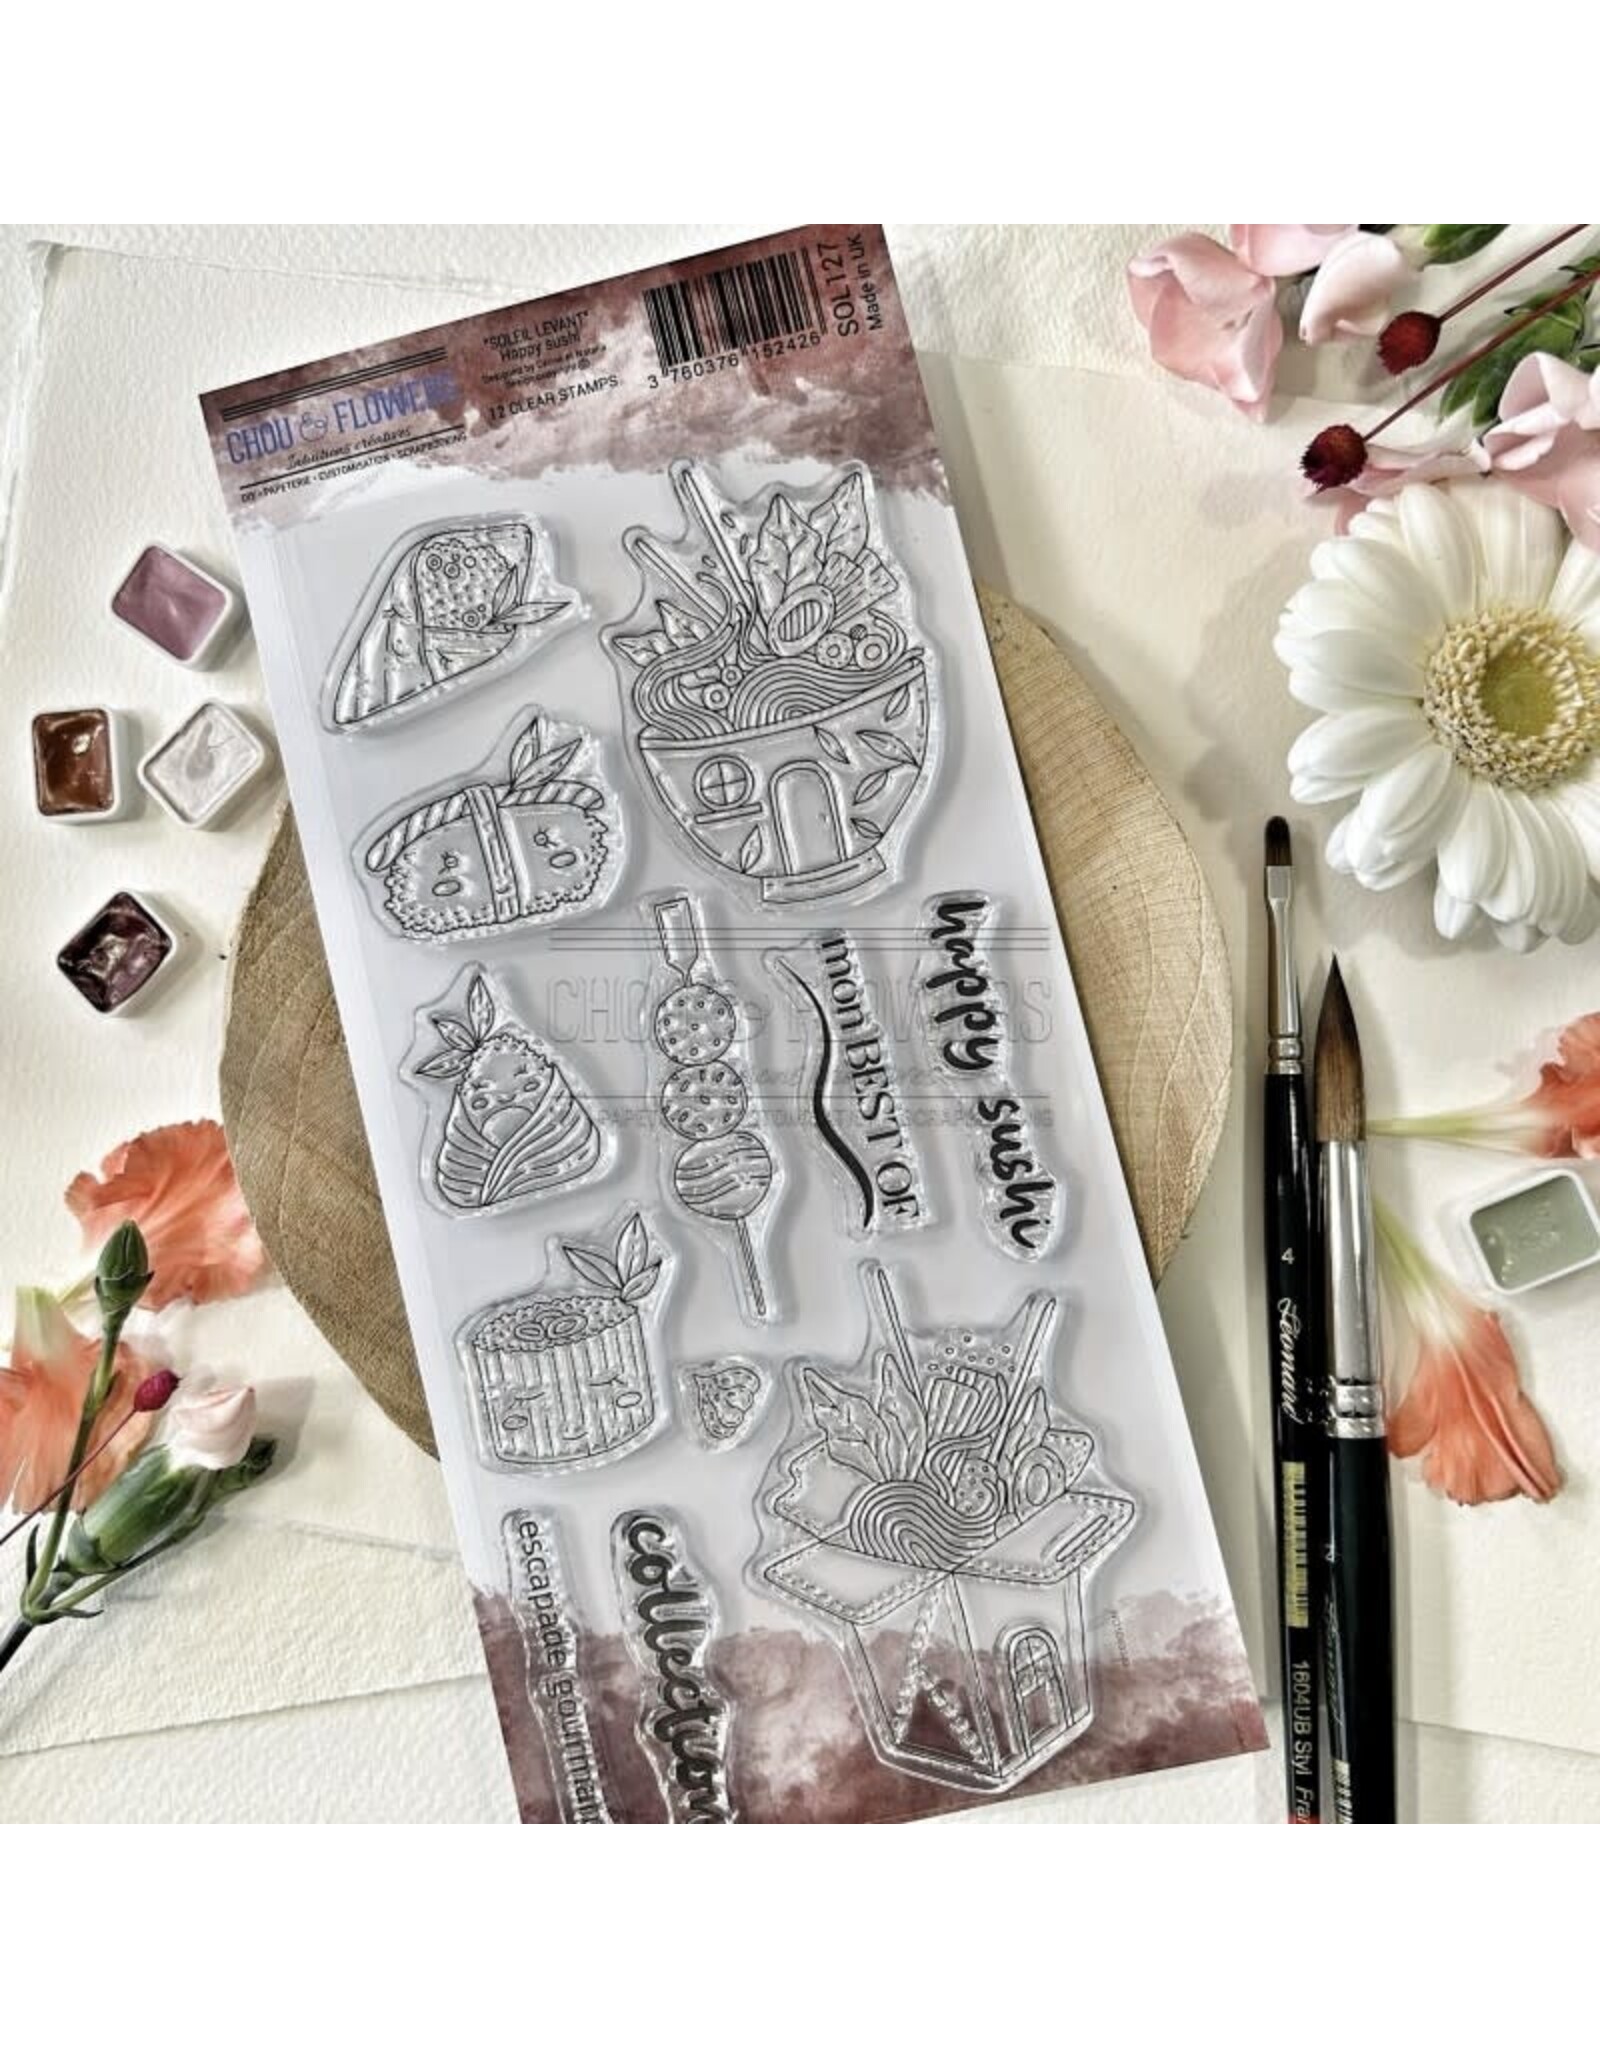 CHOU & FLOWERS CHOU & FLOWERS COLLECTION SOLEIL LEVANT HAPPY SUSHI CLEAR STAMP SET